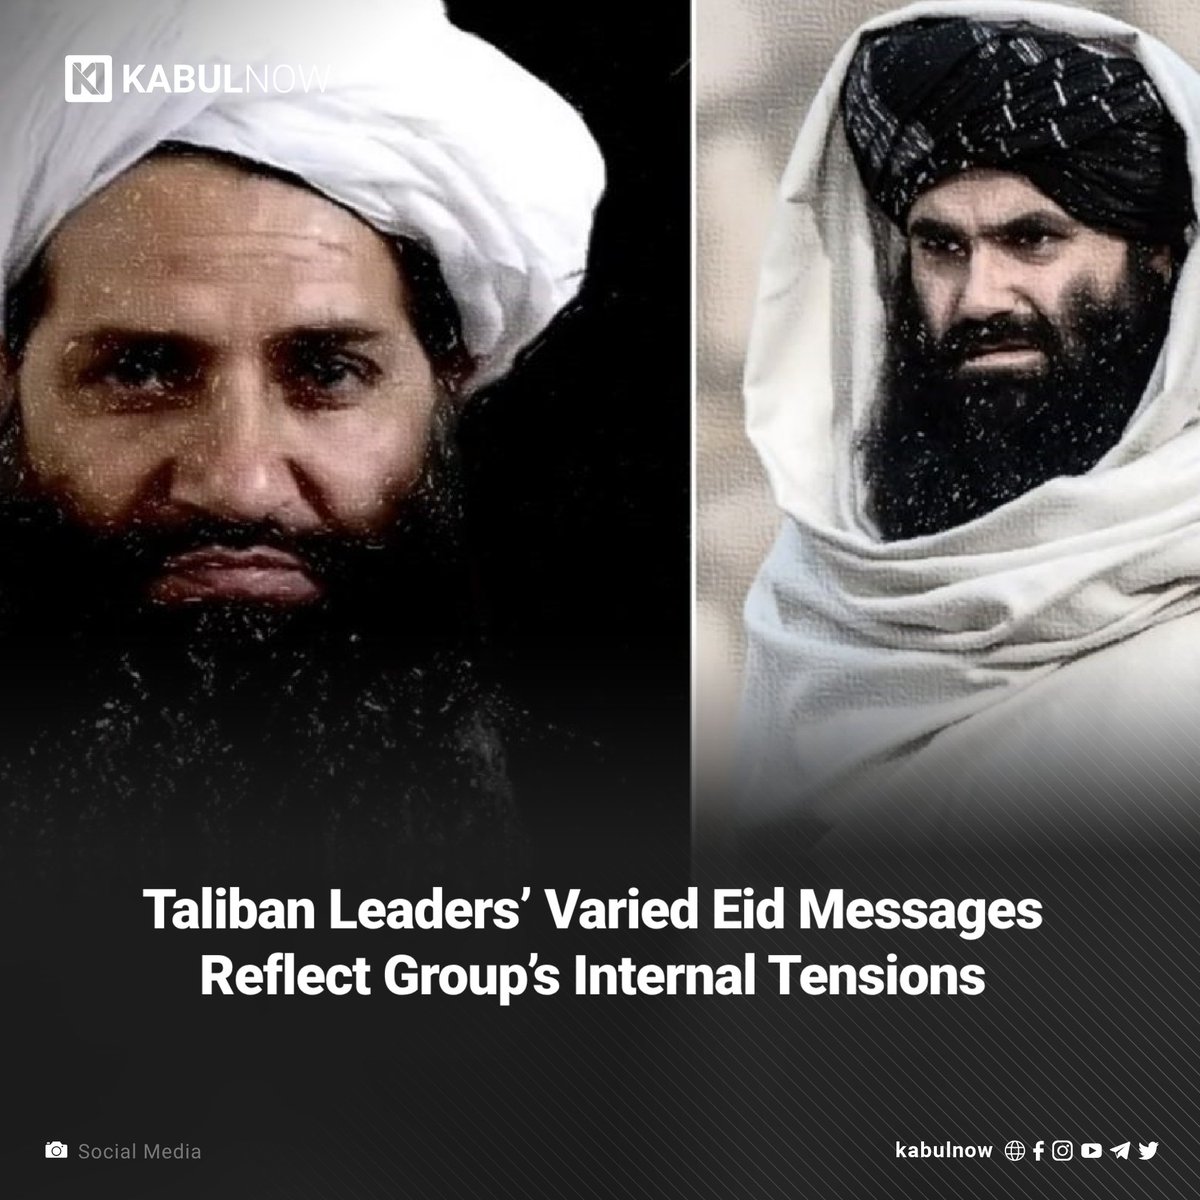 The contrasting Eid al-Fitr messages from Taliban leaders—one advocating for strict Islamic law enforcement while the other seeks to avoid harsher policies—highlight evident tensions within the group. Read more: kabulnow.com/2024/04/35340/